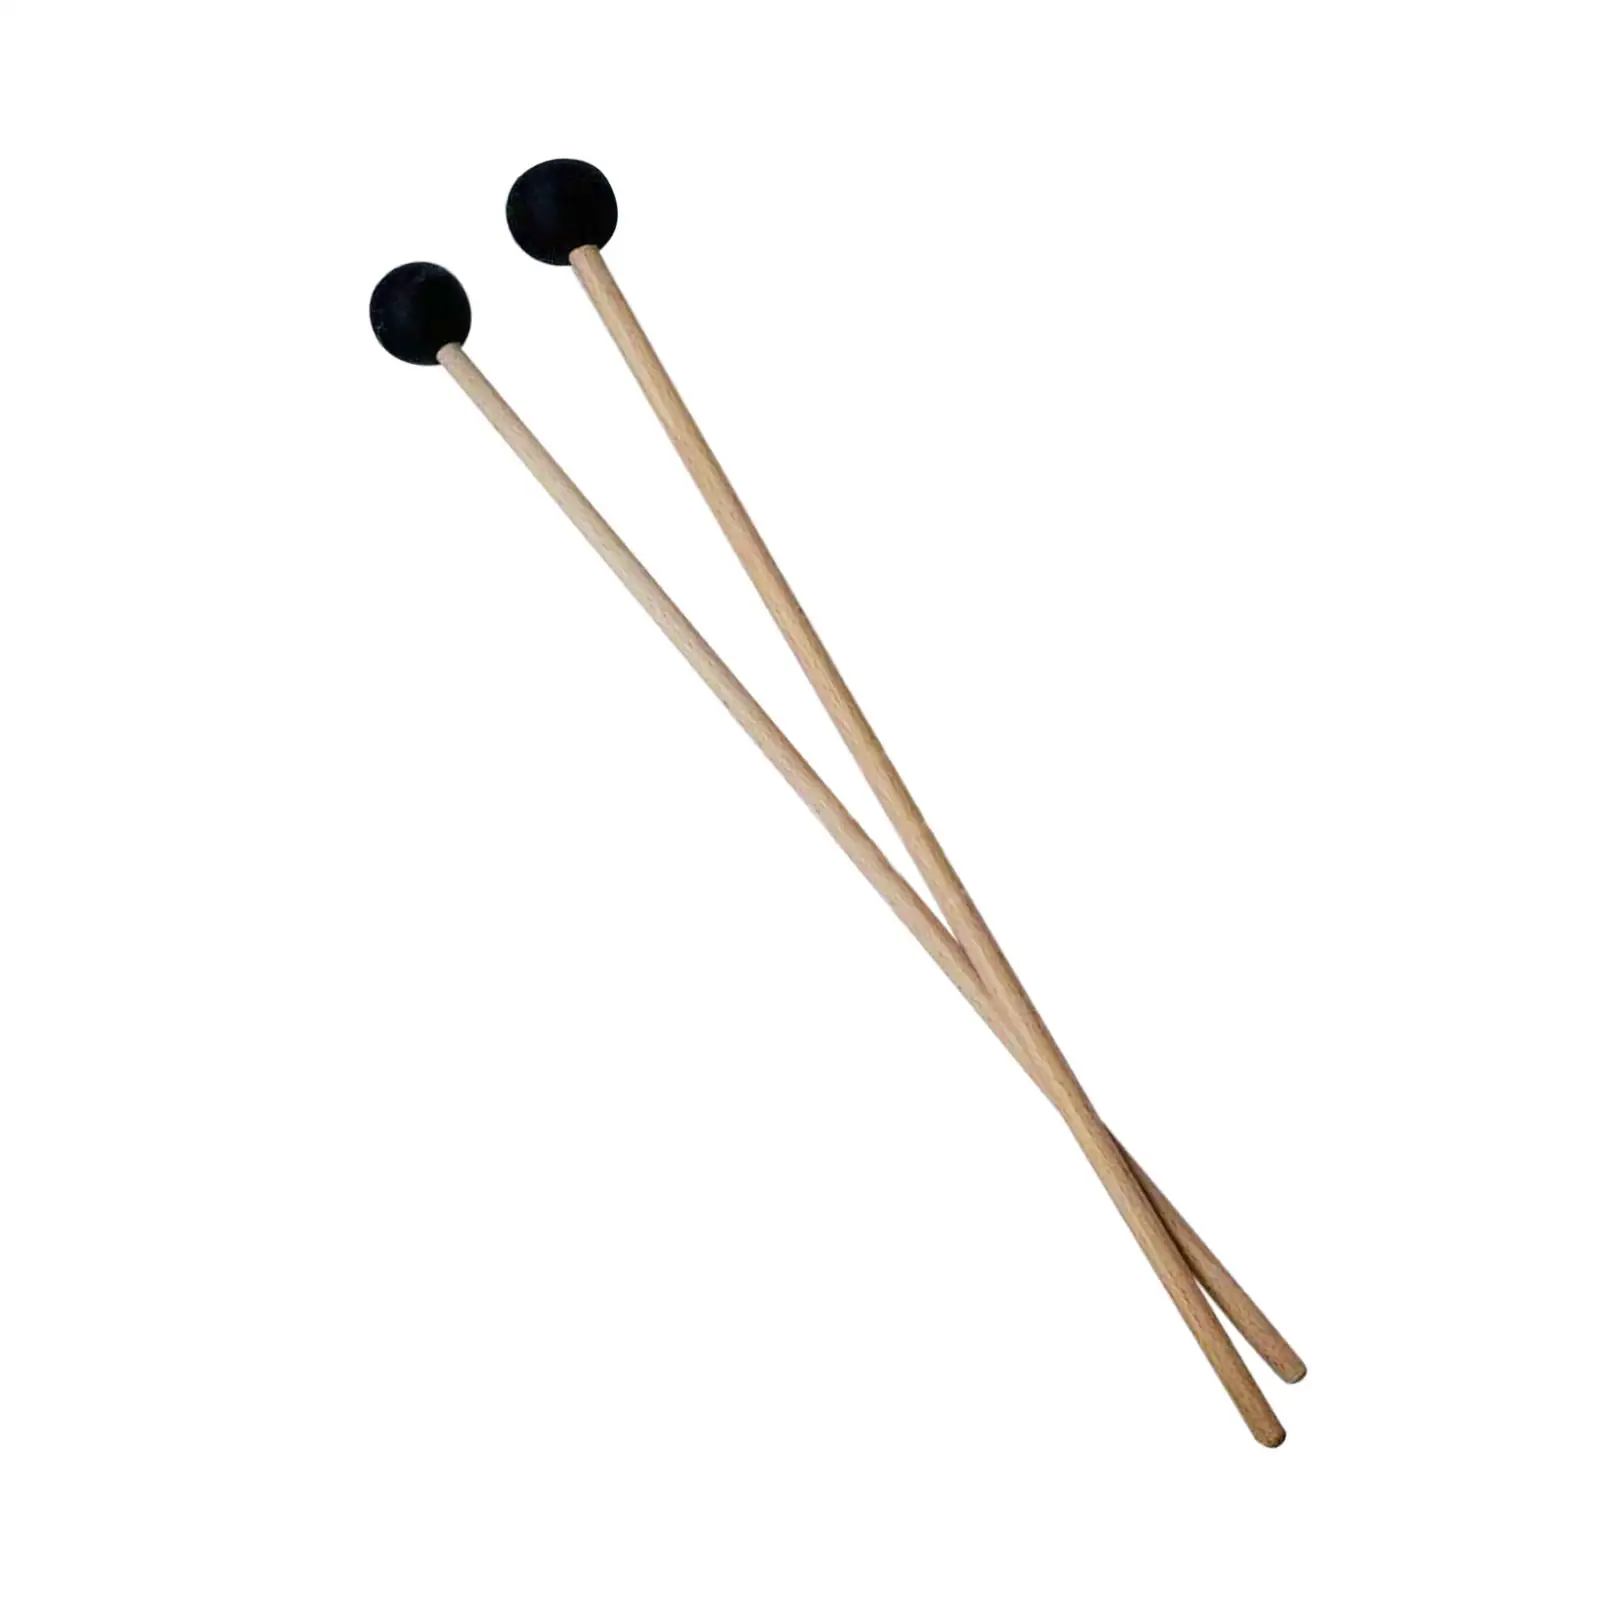 2 Pieces Glockenspiel Sticks Rubber for Gong Woodblock Drum Bells Ethereal Drums